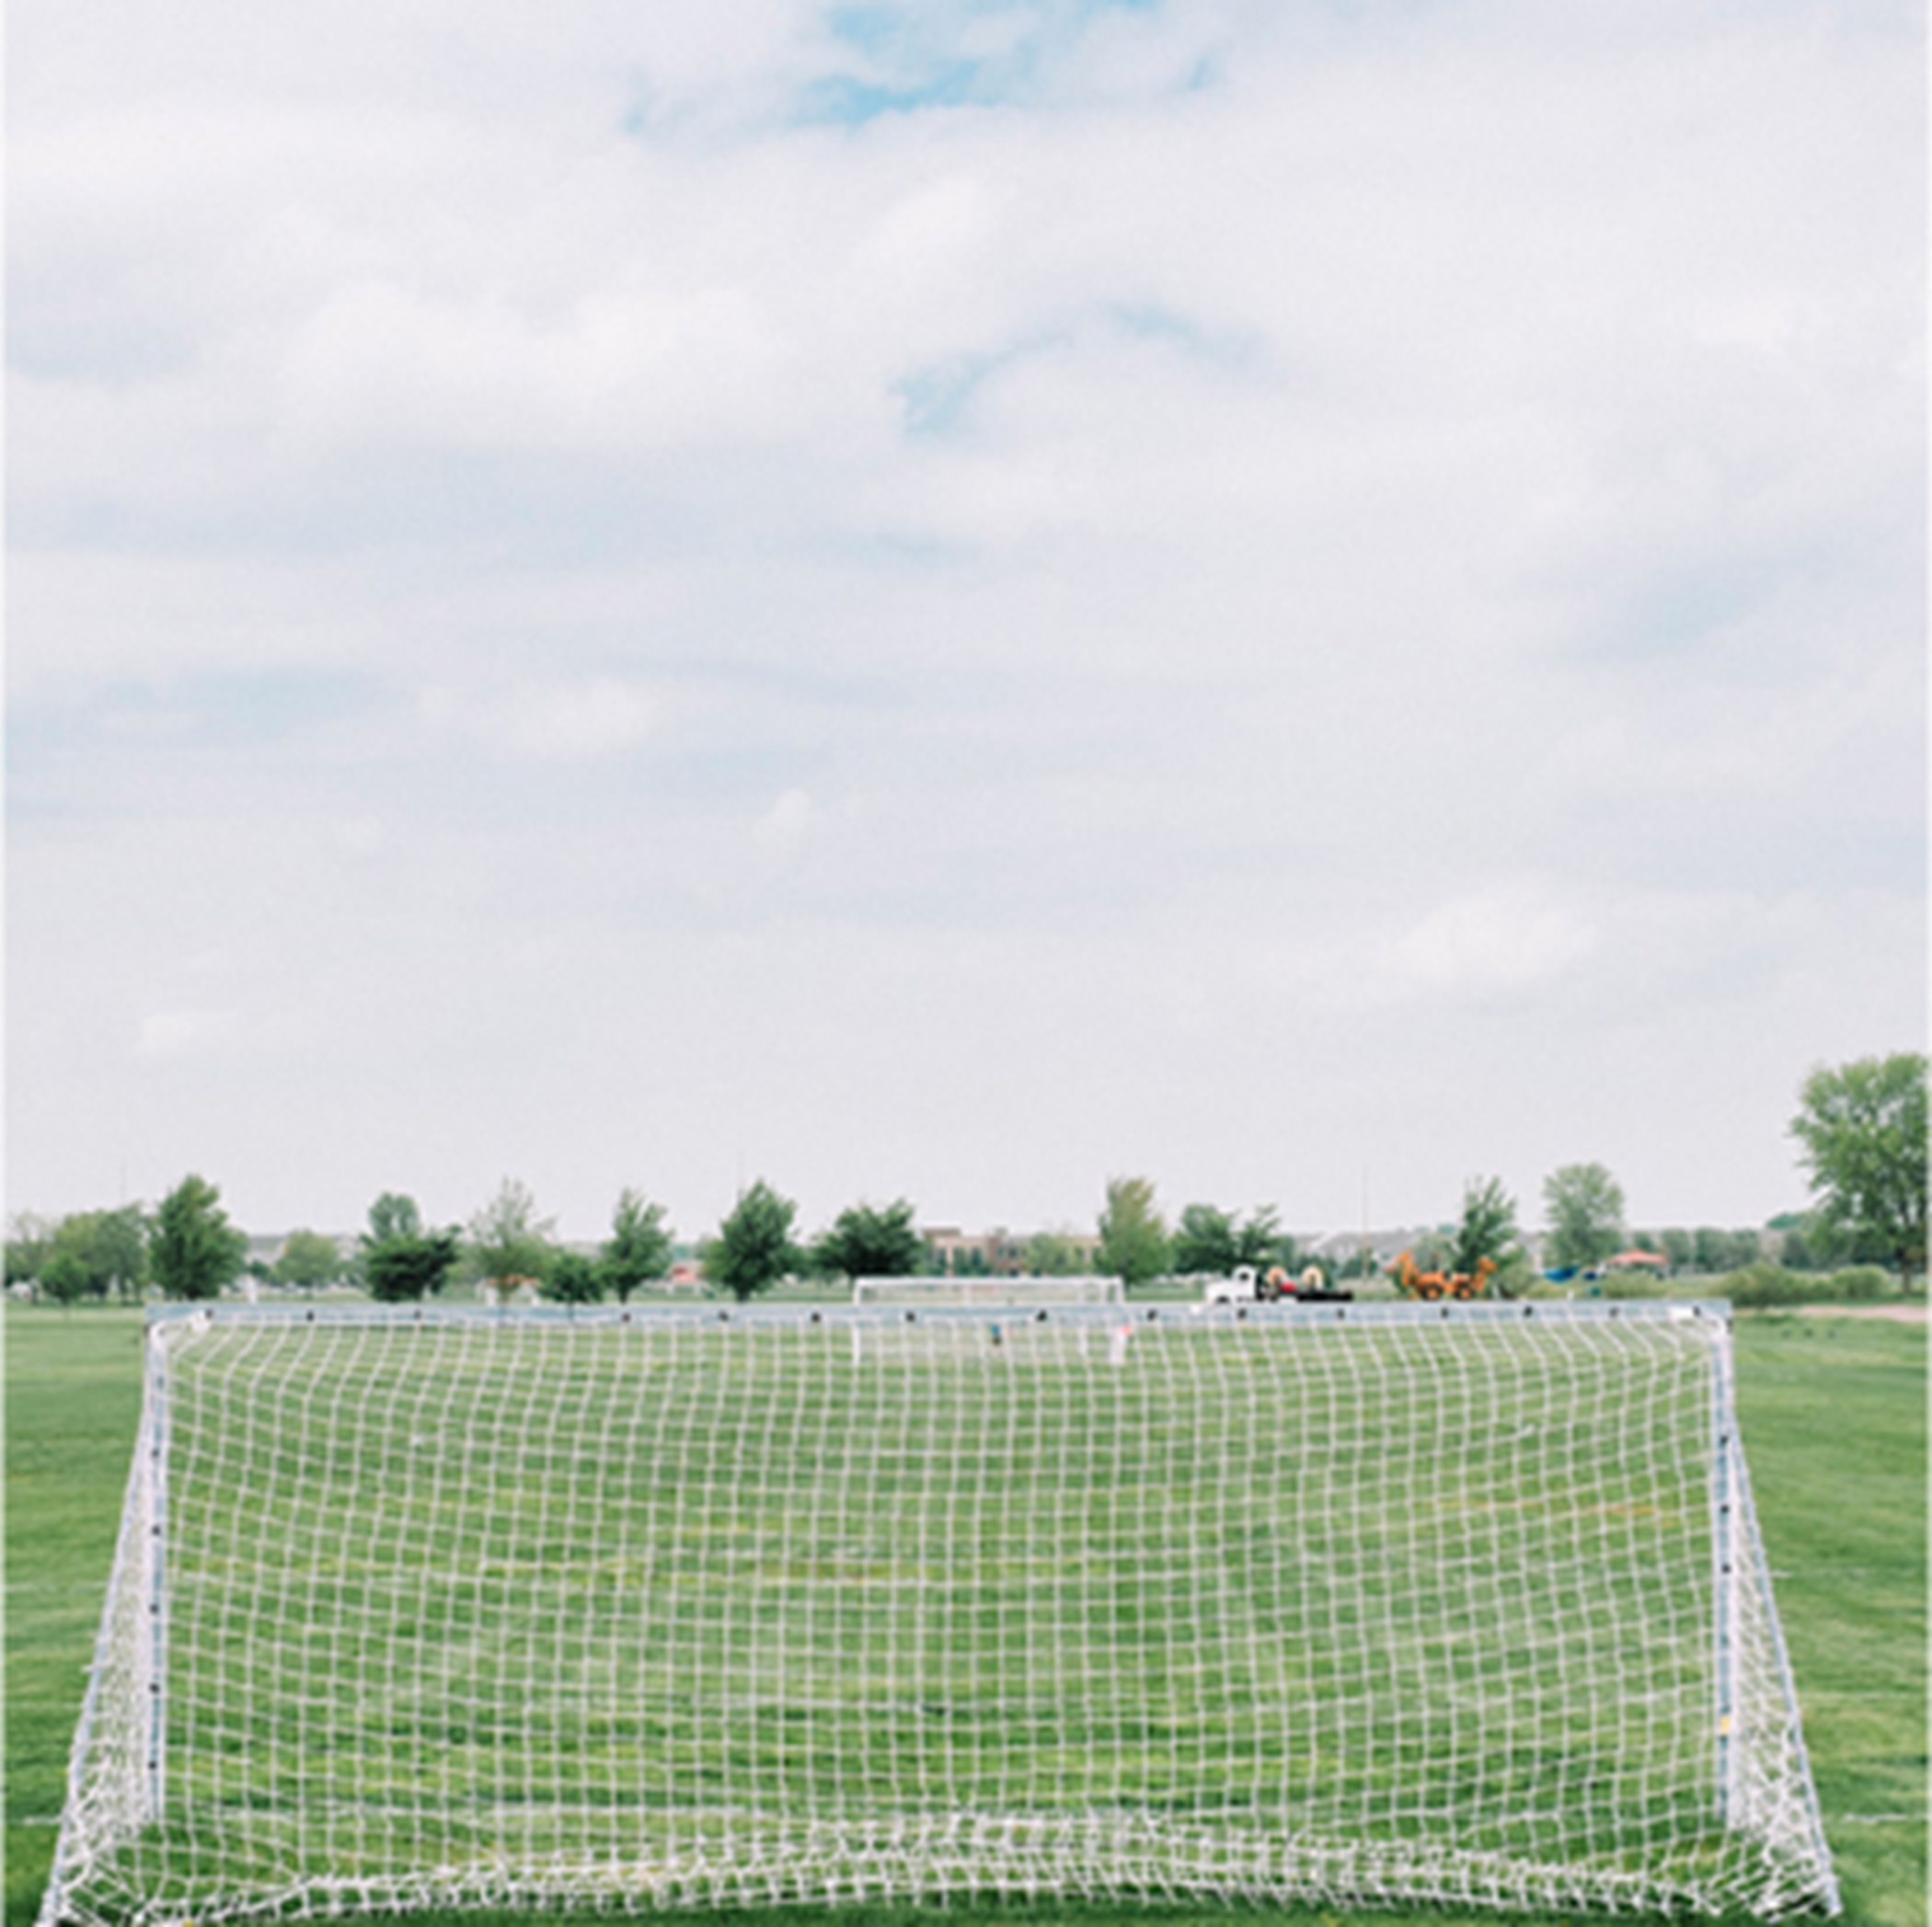 Soccer Field and Goal